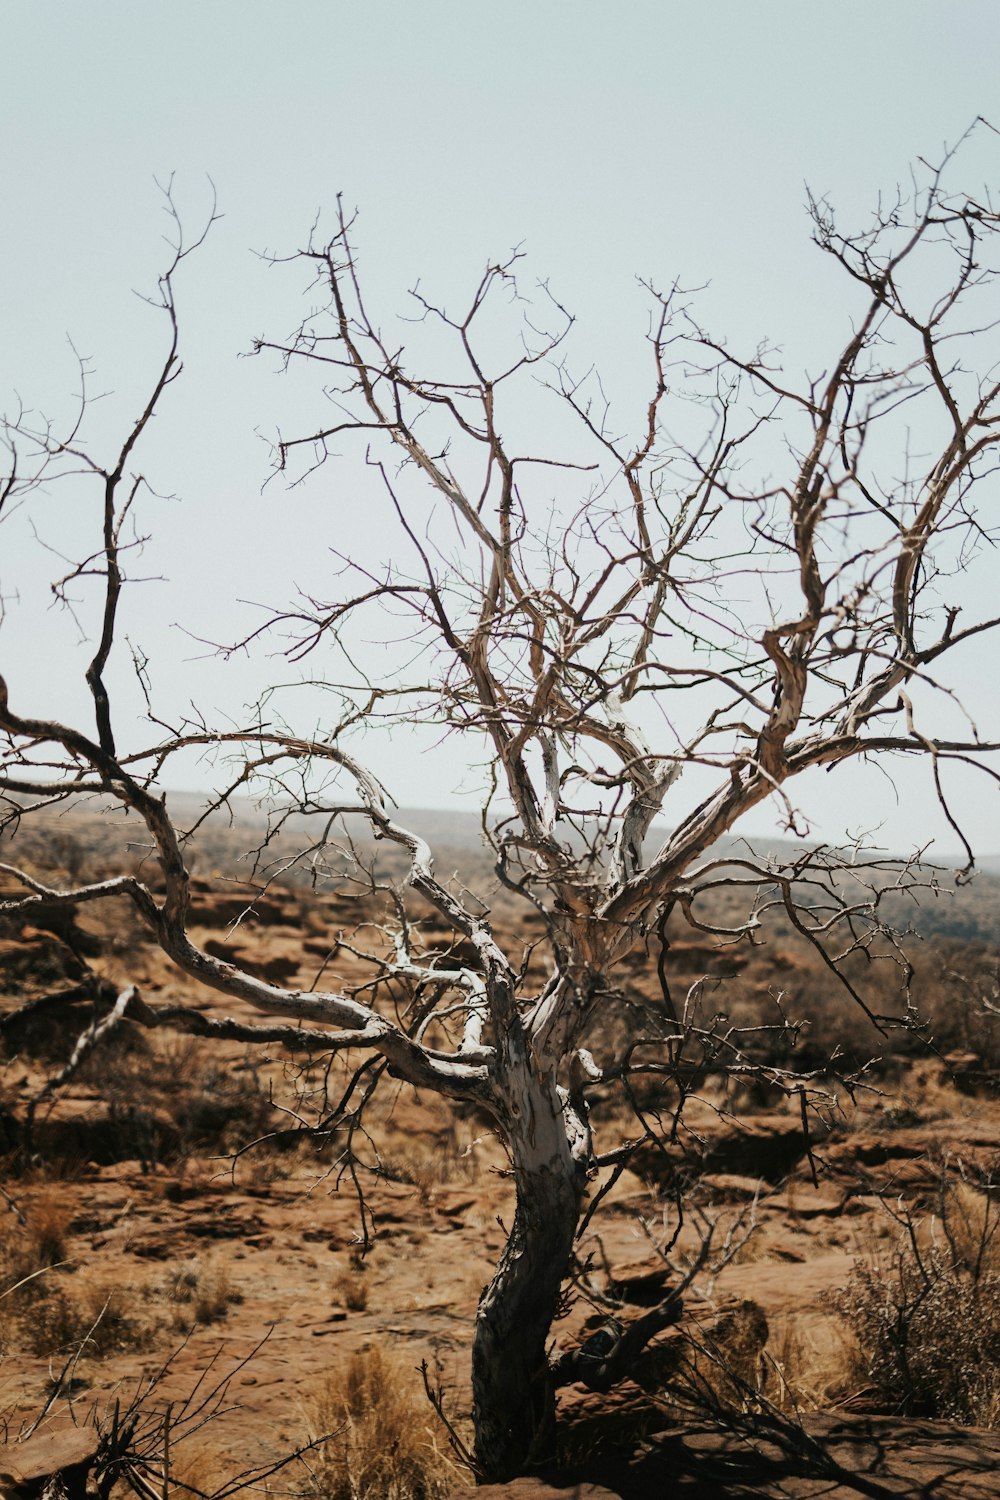 a bare tree in the middle of a desert